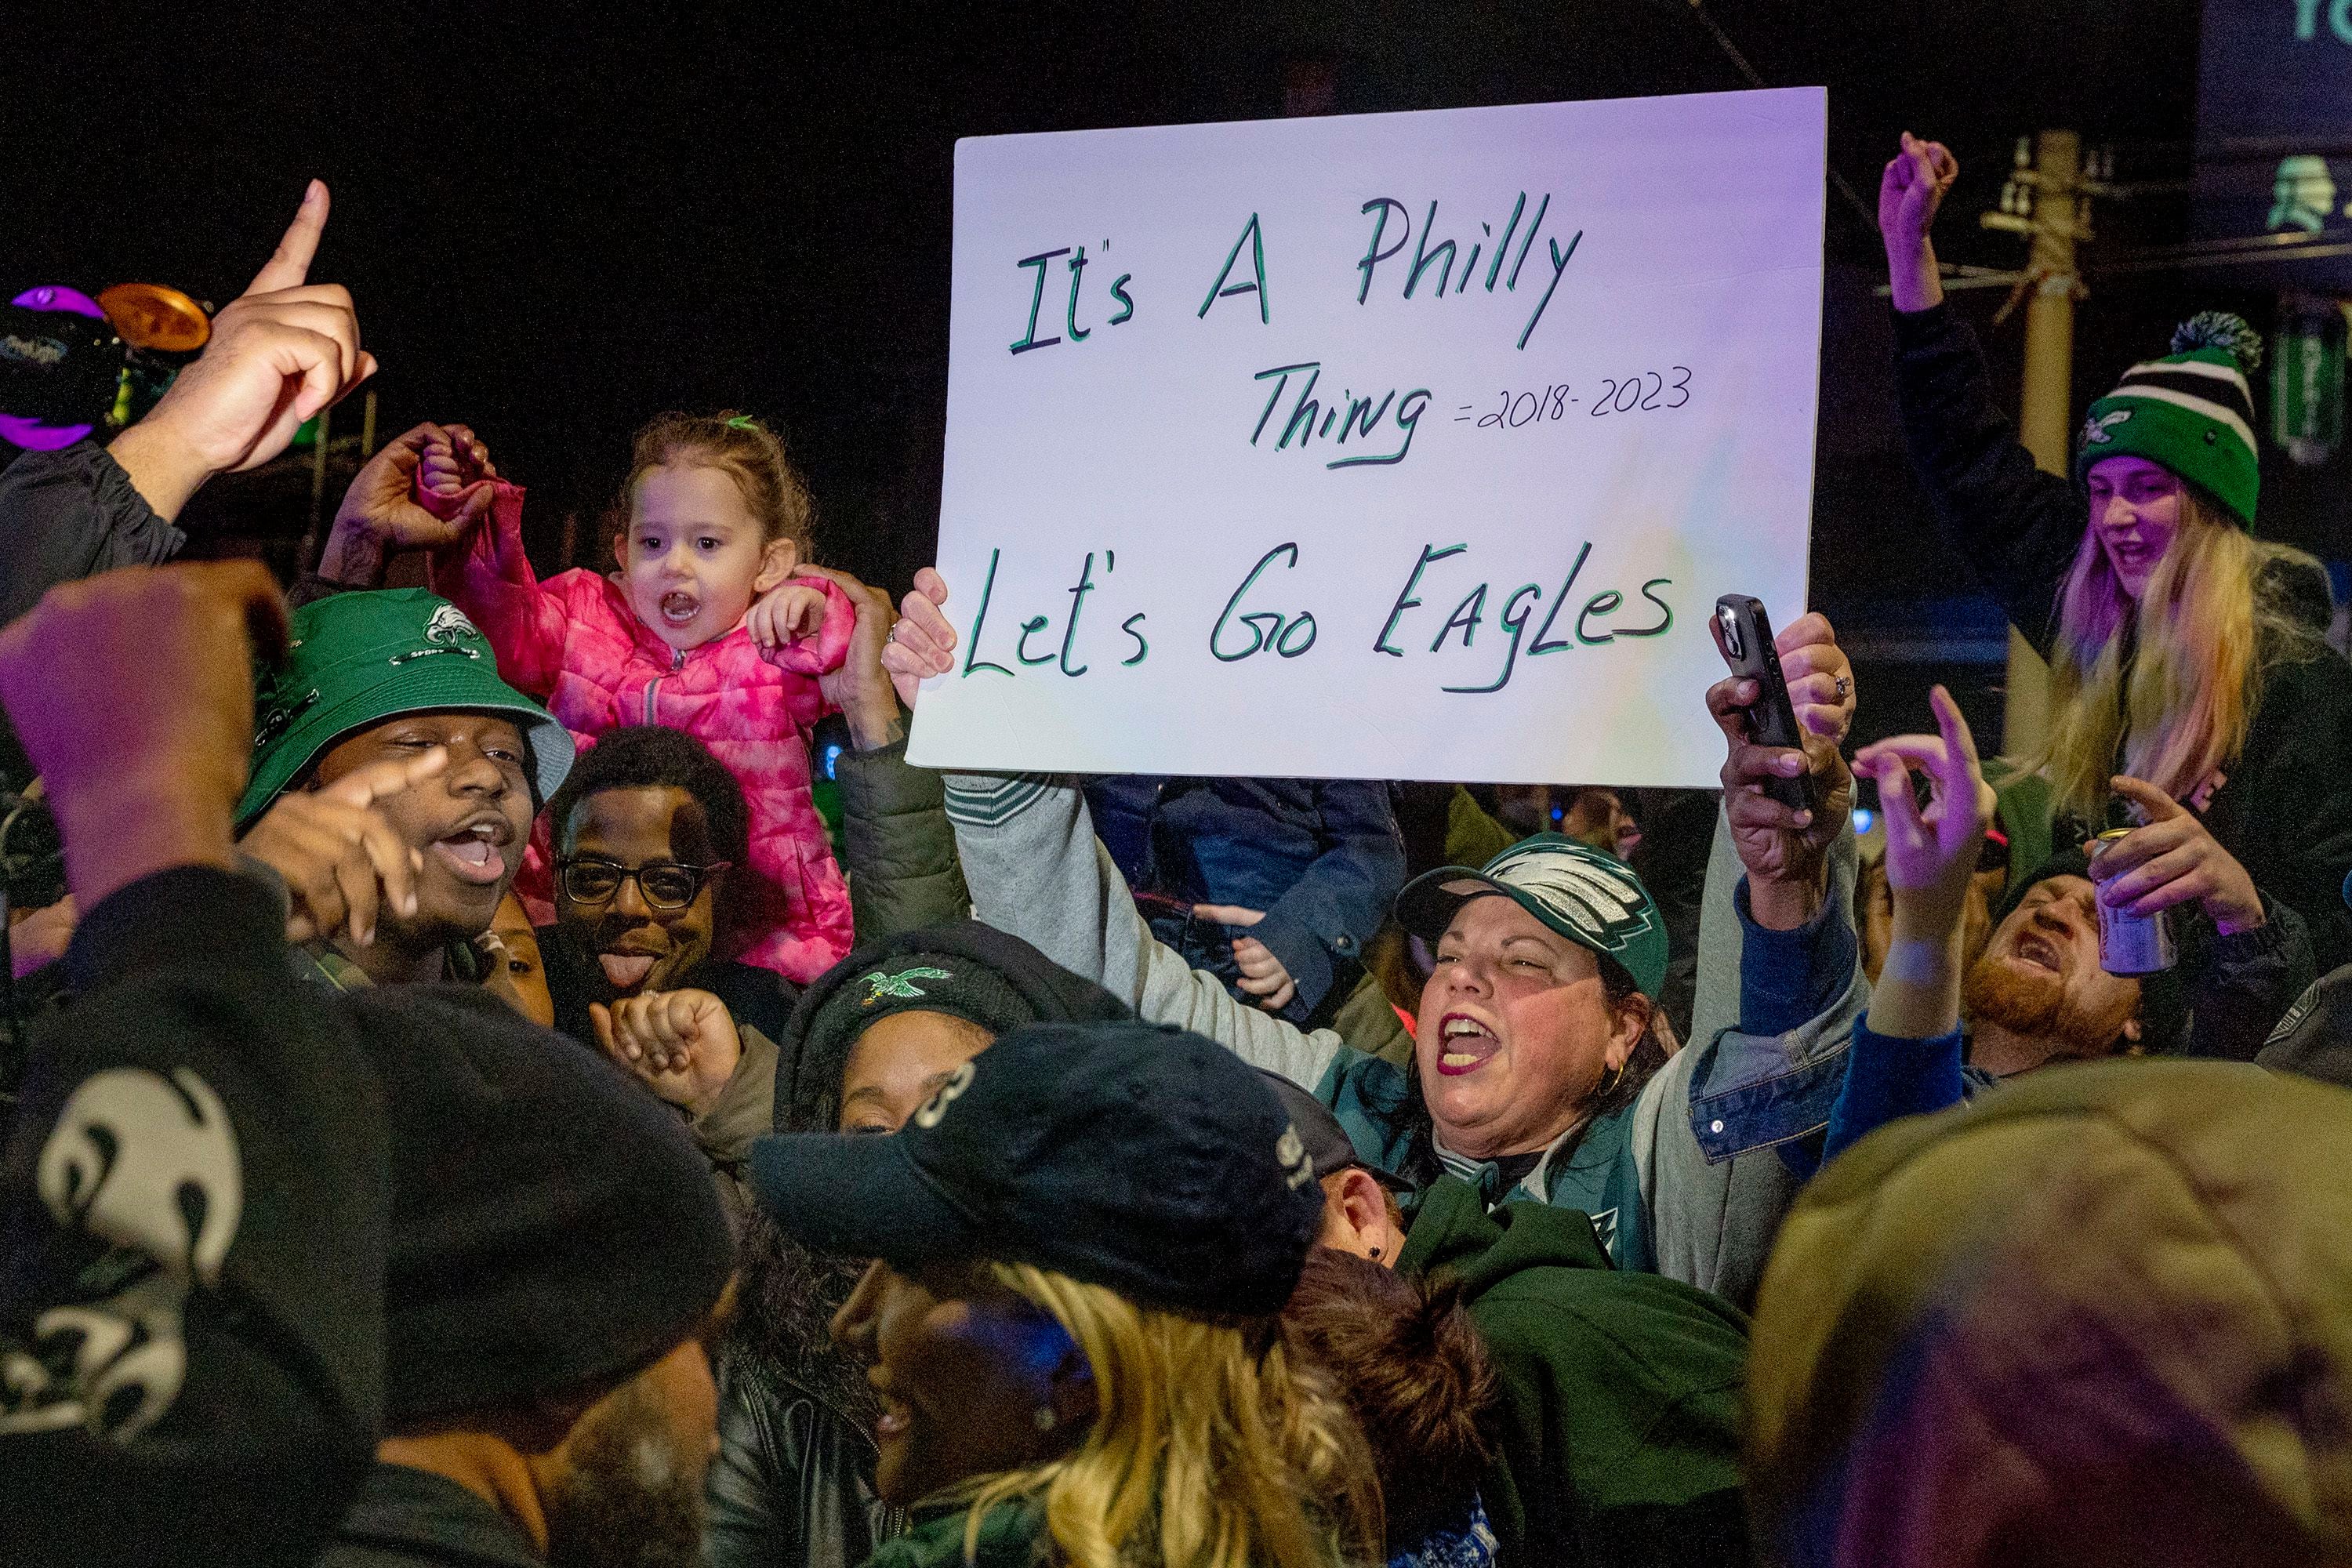 It's a Philly Thing:' Eagles Have New Slogan for NFL Playoff Run – NBC10  Philadelphia